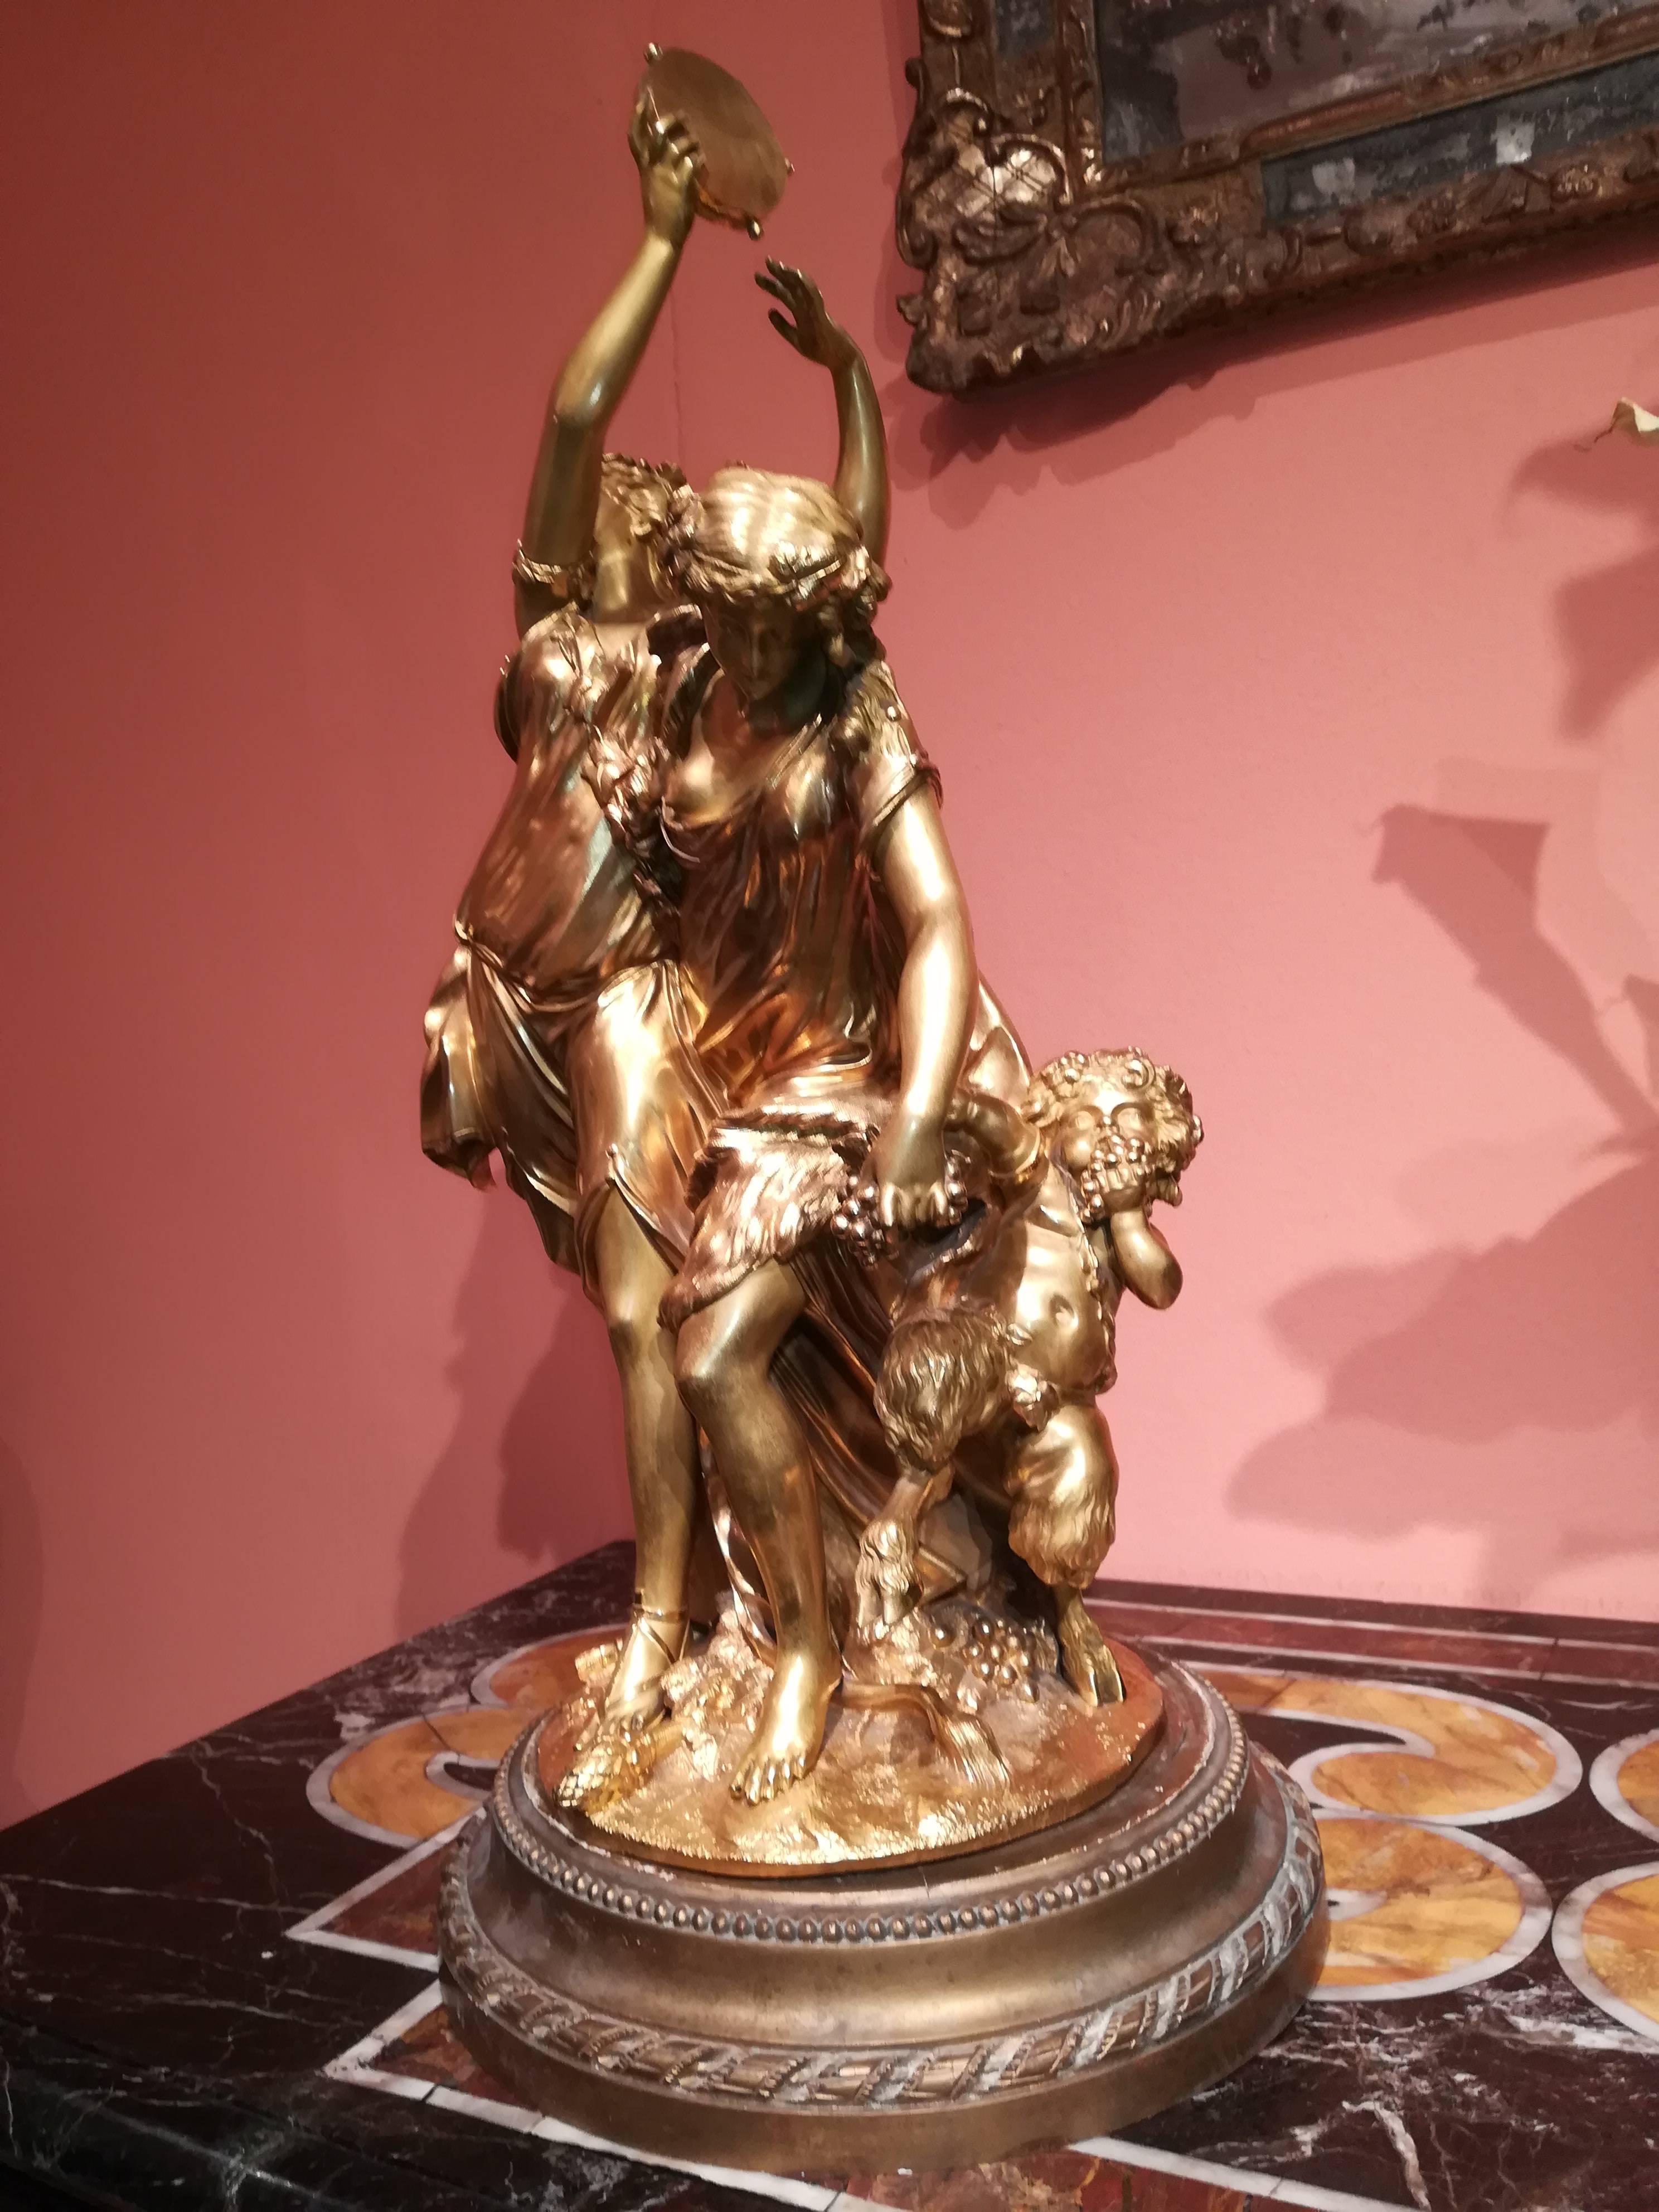 Late 19th century gilded bronze group after Clodion, gold patina, figurating three characters: 